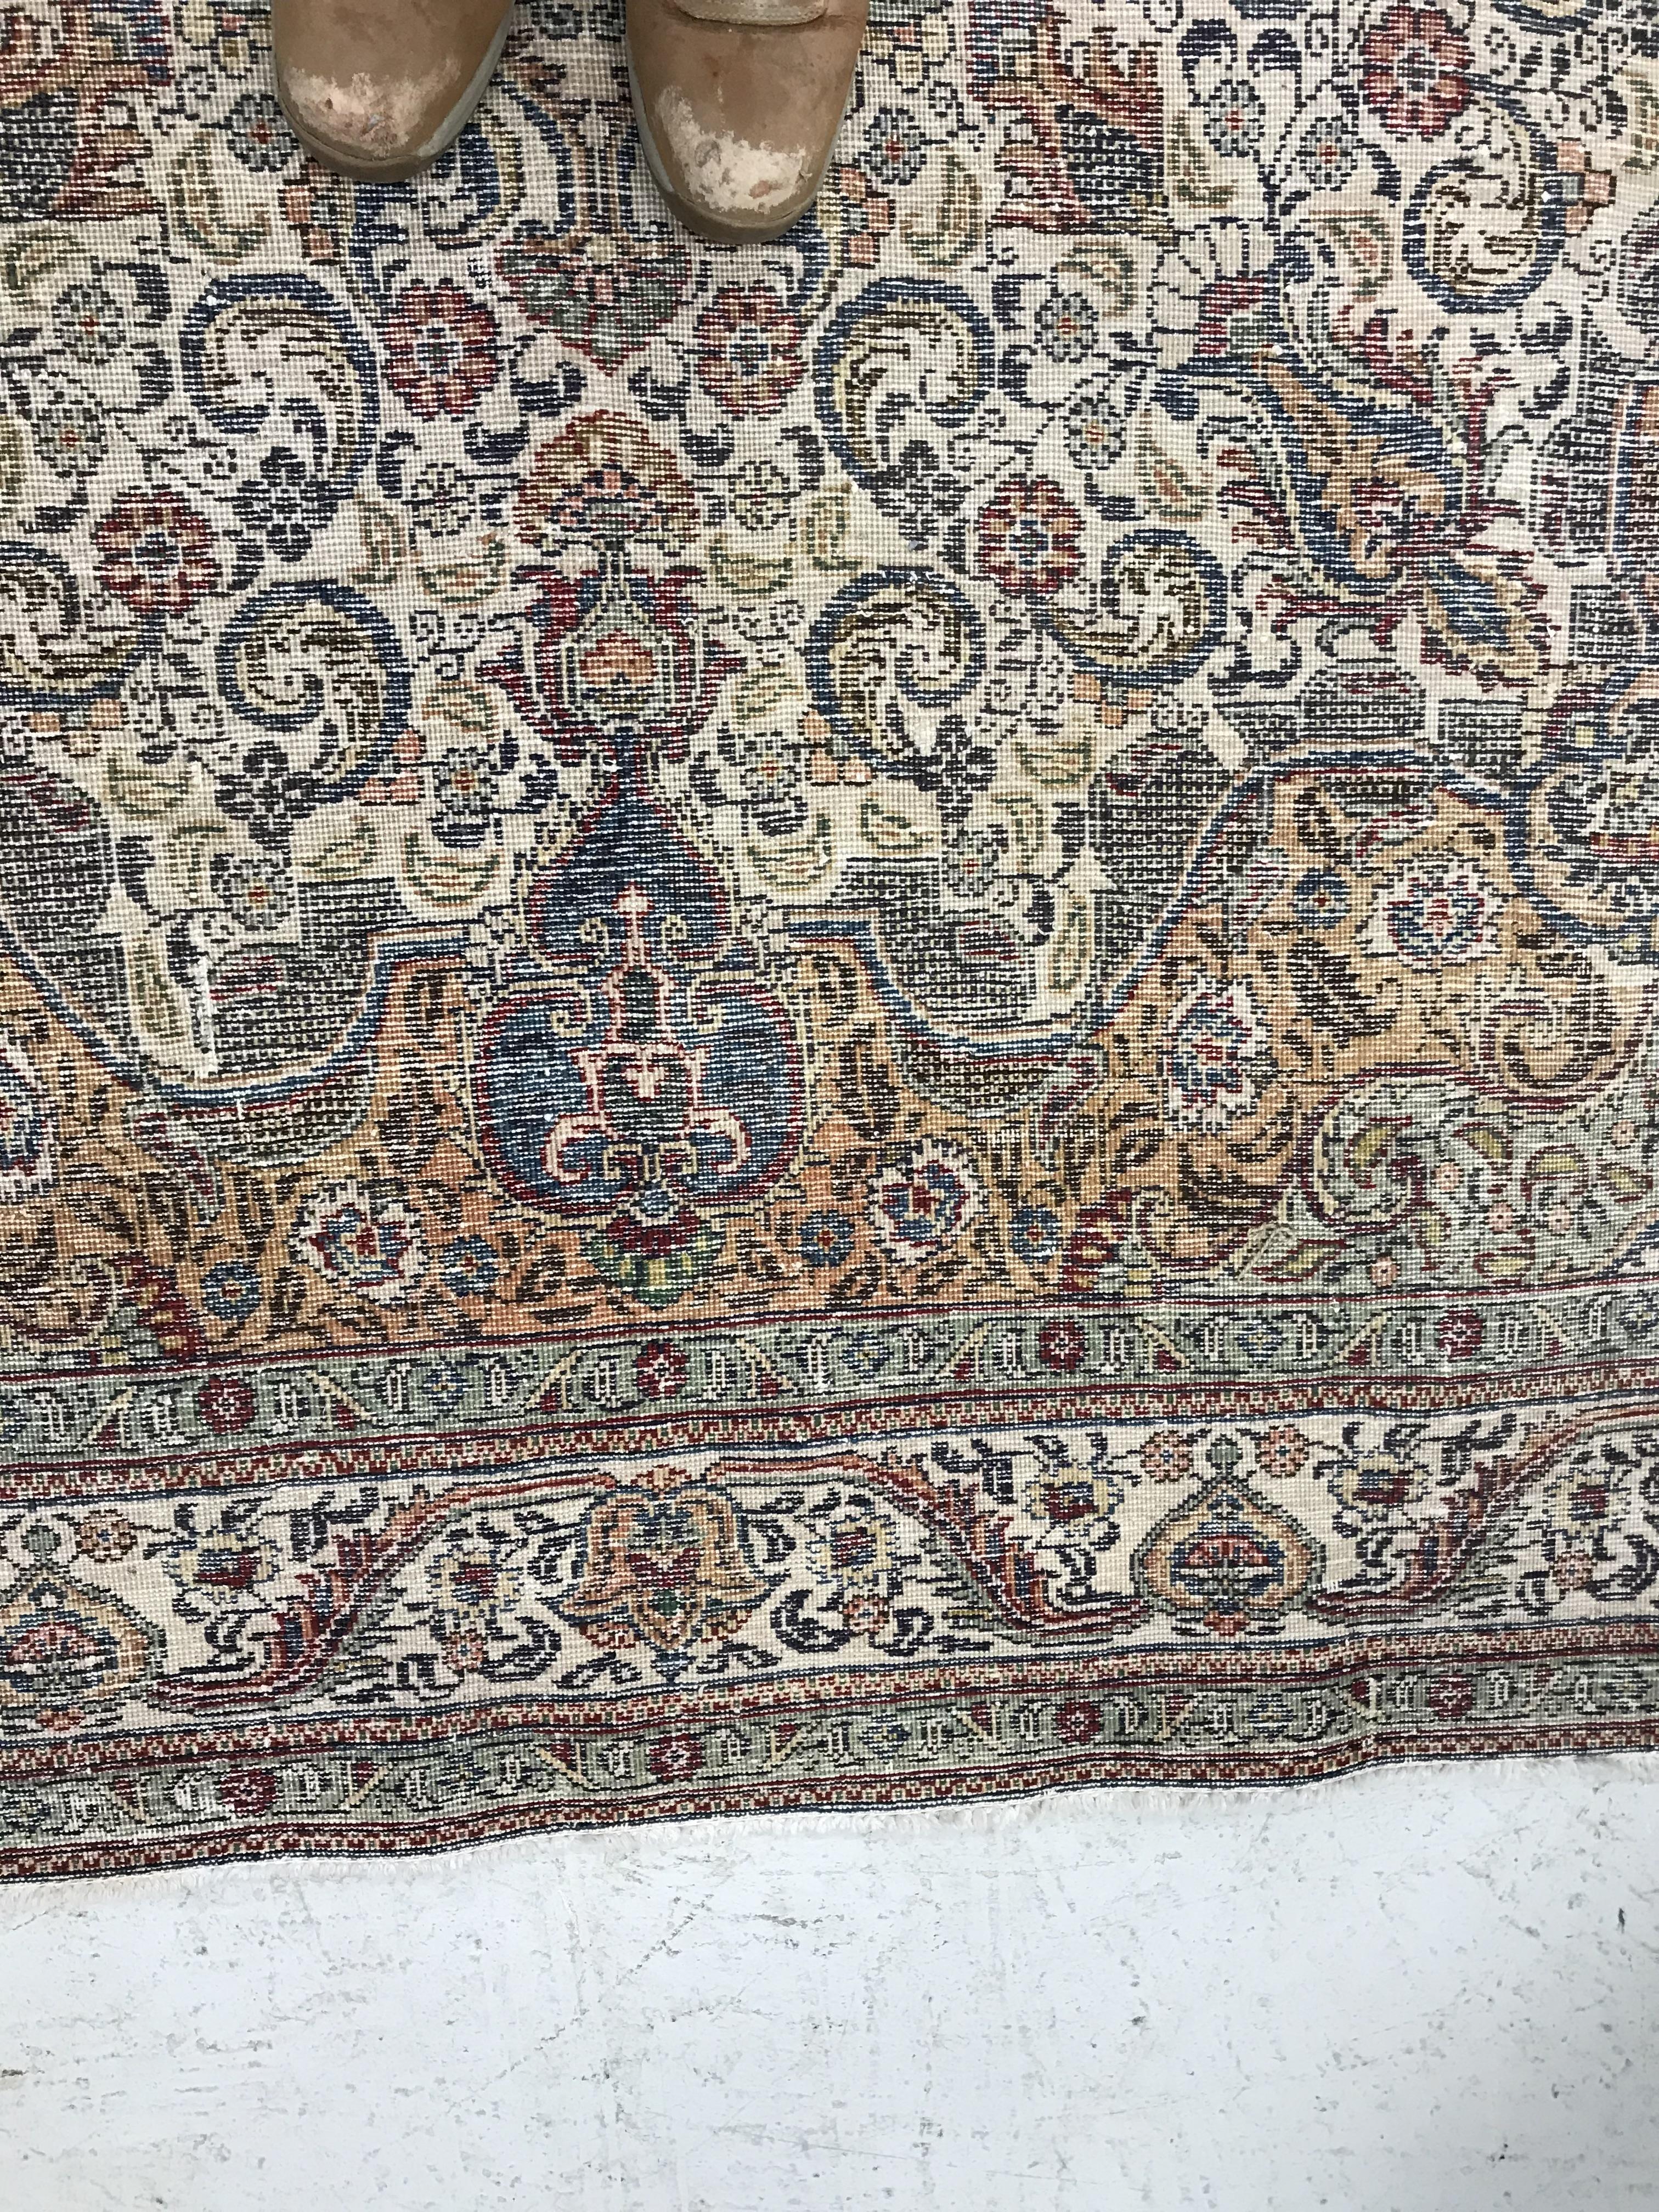 A Persian rug, - Image 37 of 38